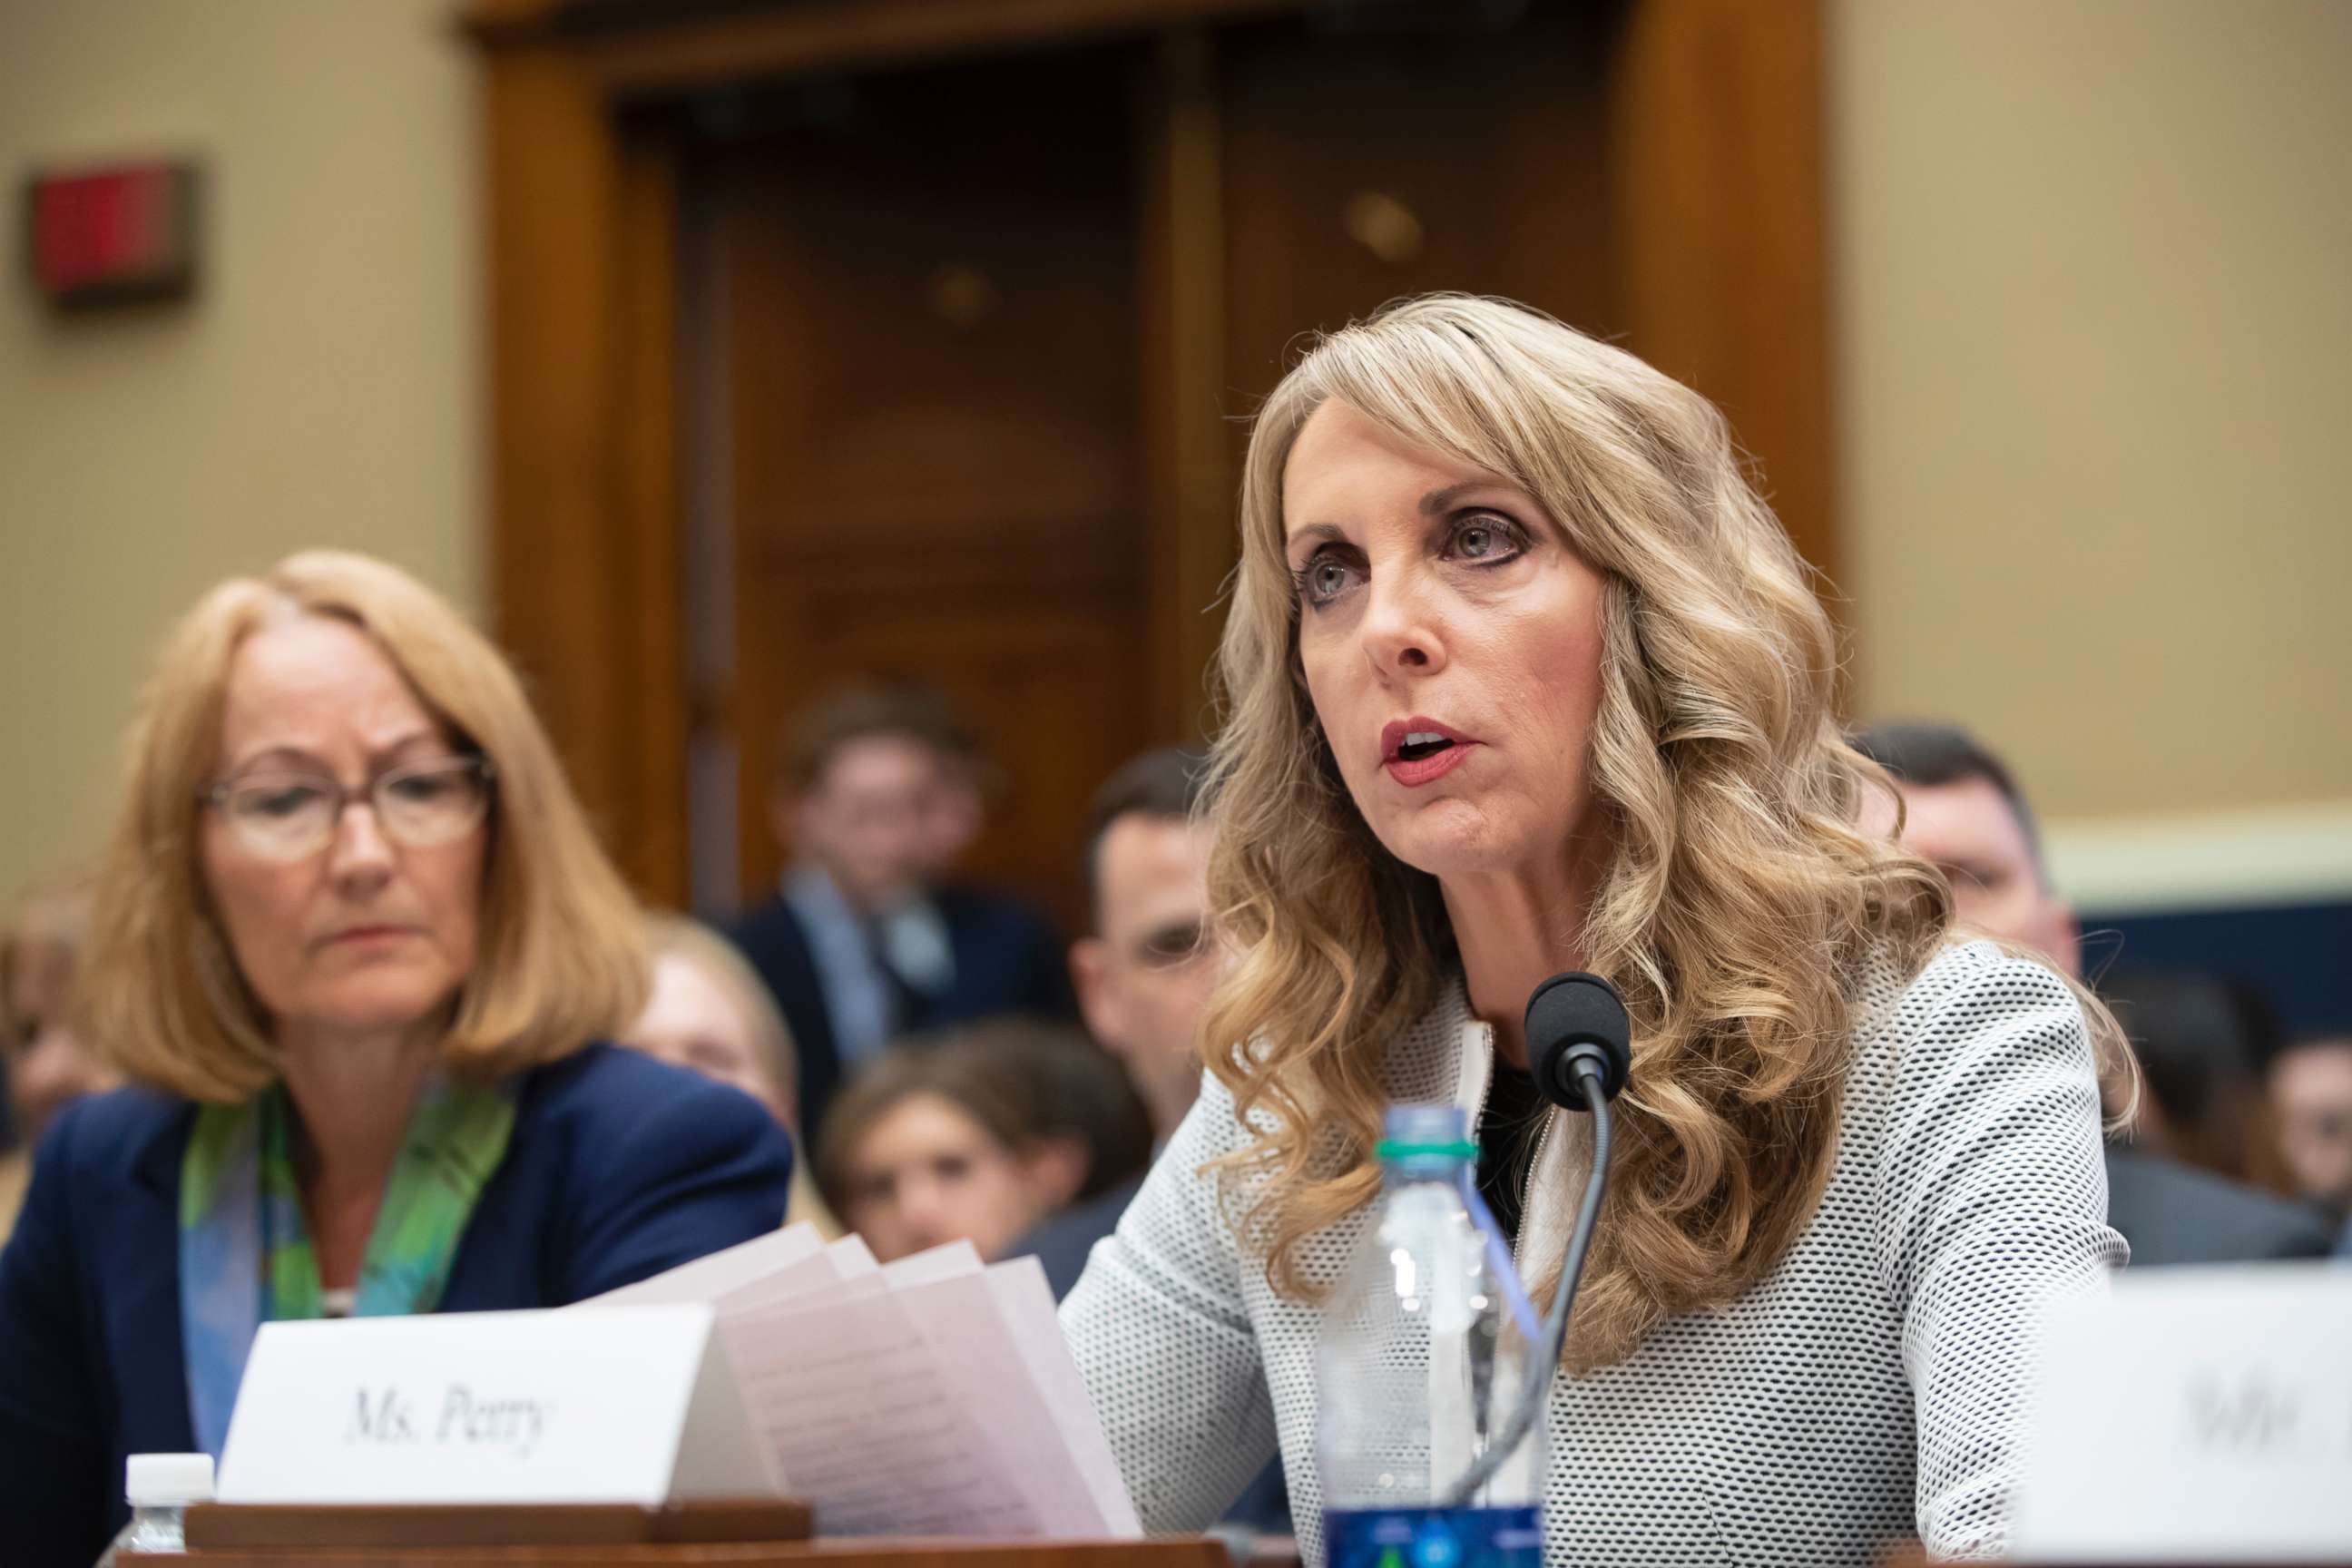 PHOTO: USA Gymnastics President and CEO Kerry Perry, center, joined at left by U.S. Olympic Committee Acting CEO Susanne Lyons, testifies before the House Commerce Oversight and Investigations Subcommittee in Washington, May 23, 2018.